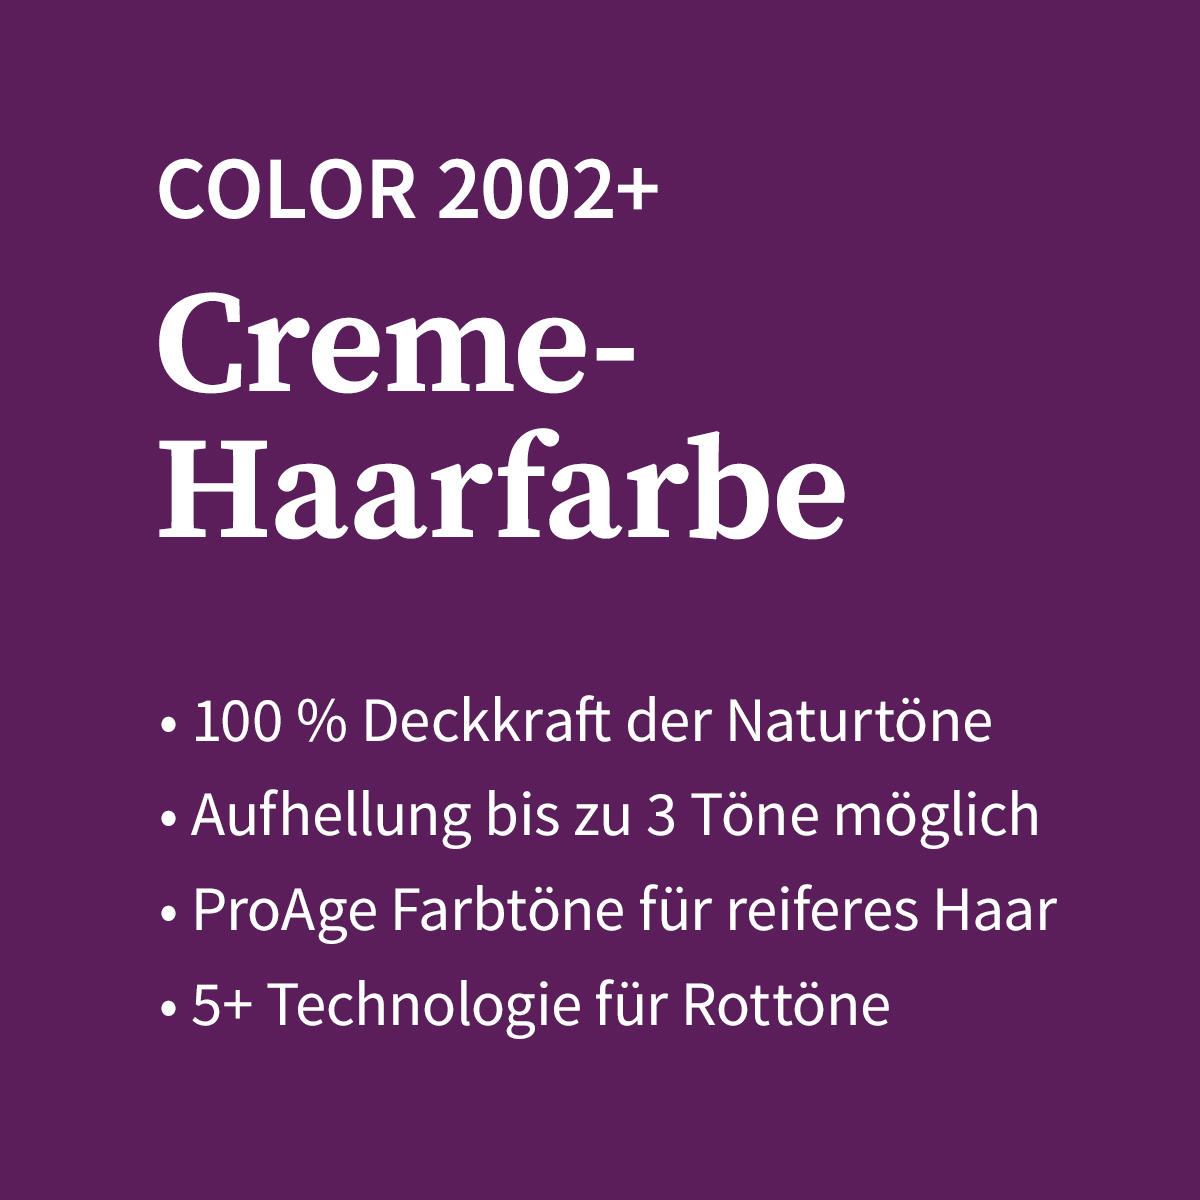 Basler Color 2002+ Cremehaarfarbe 11/8 hell lichtblond perl, Tube 60 ml - 4